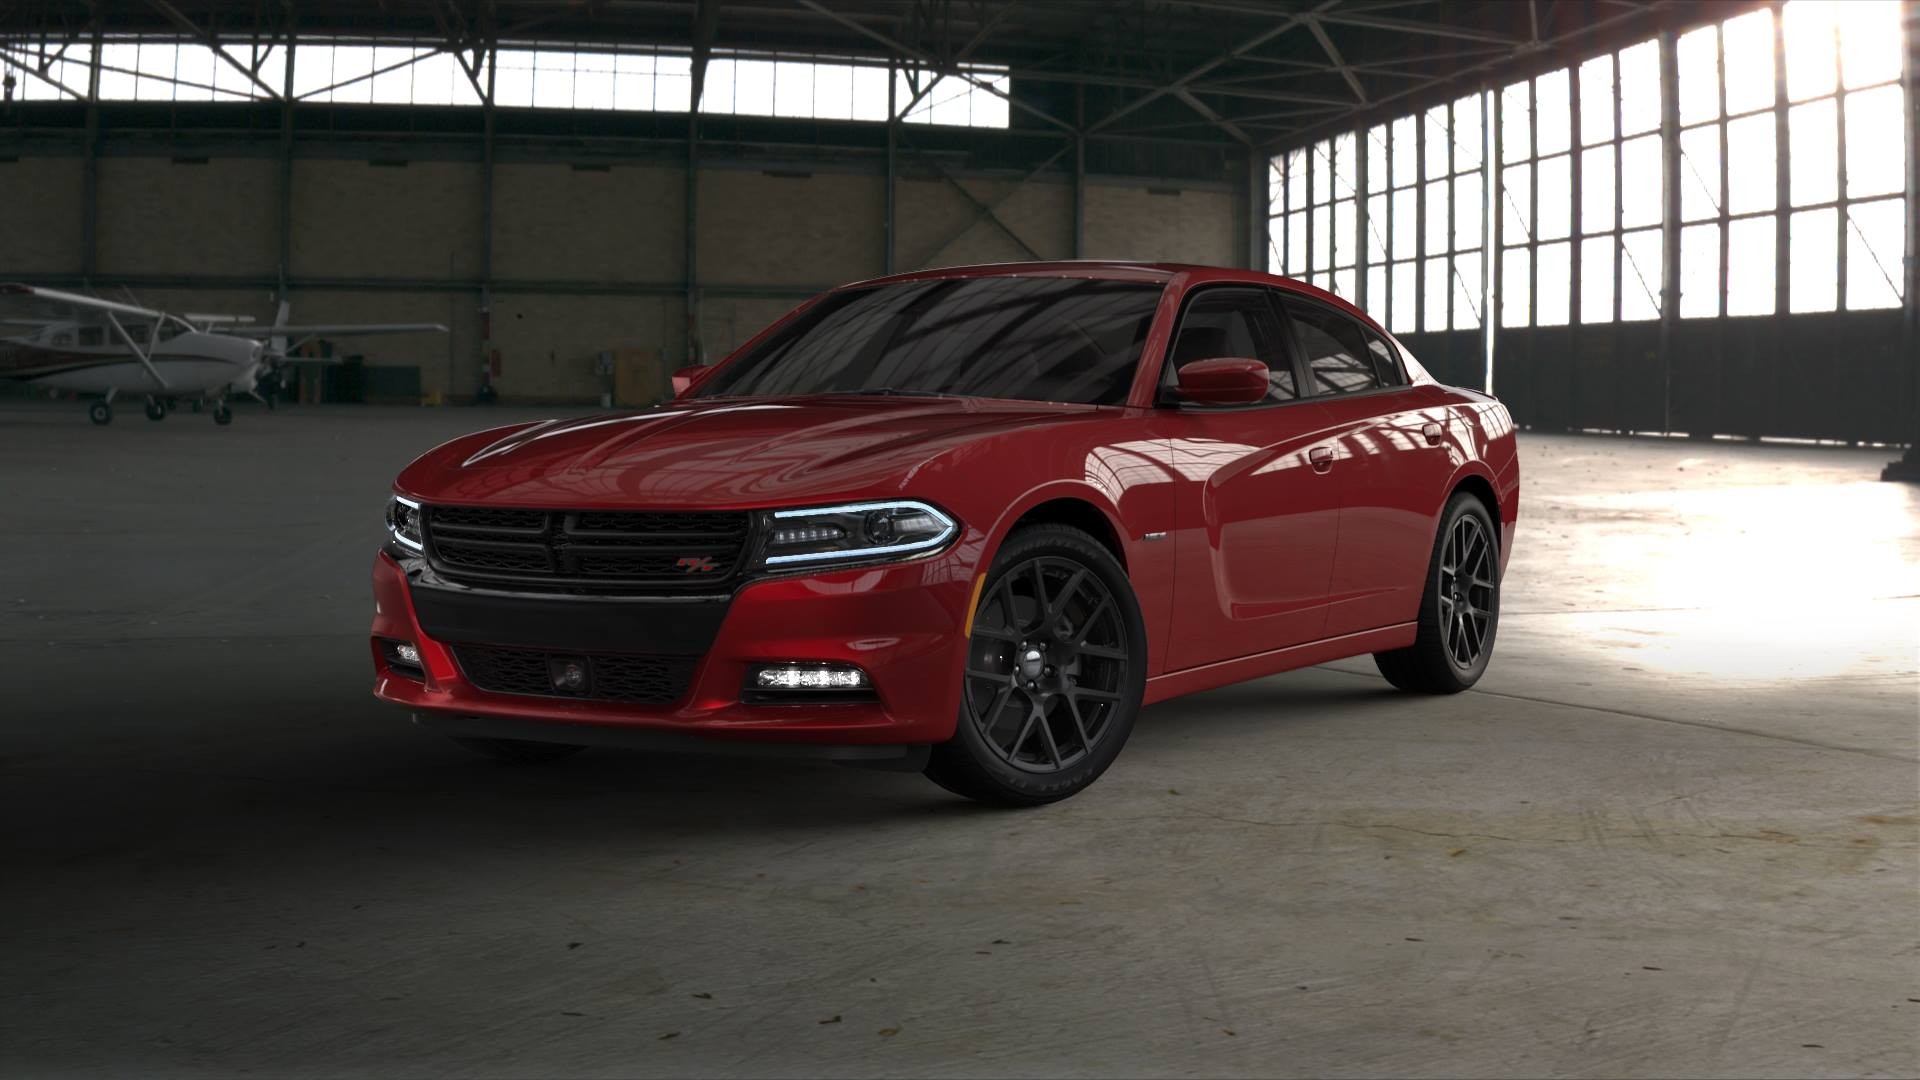 Dodge, Dodge Charger, Car, Muscle Cars, Red Cars Wallpaper